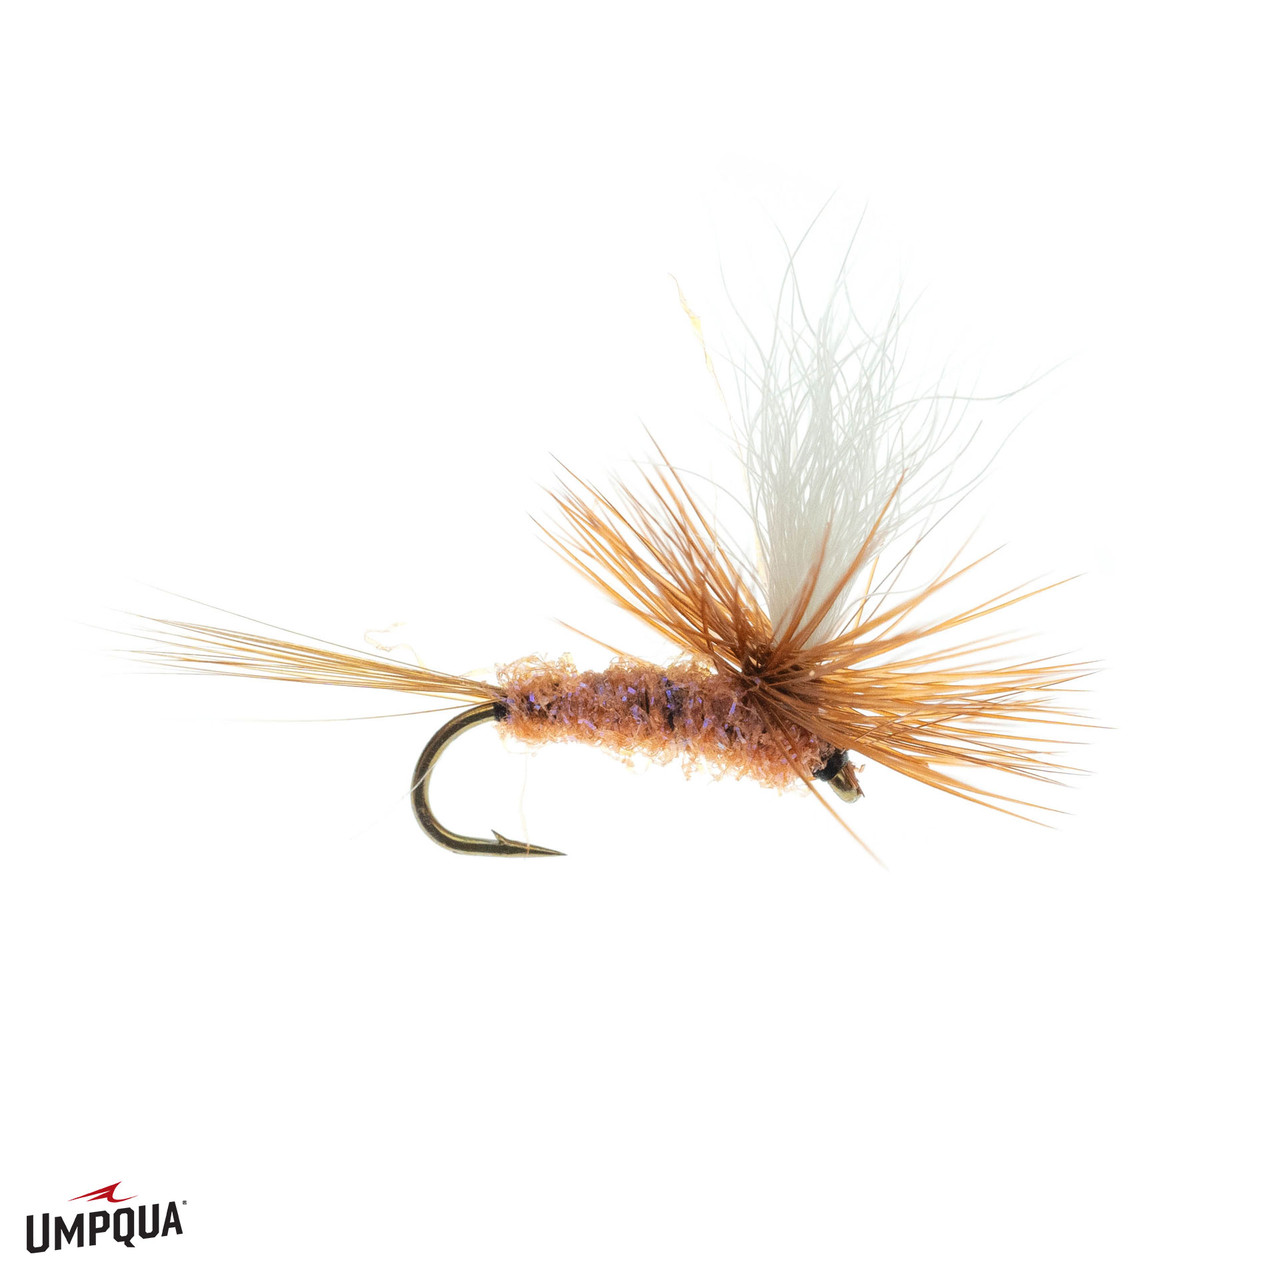 The Parachute Adams; an Attractor Fly for Everyone - Simpson Fly Fishing